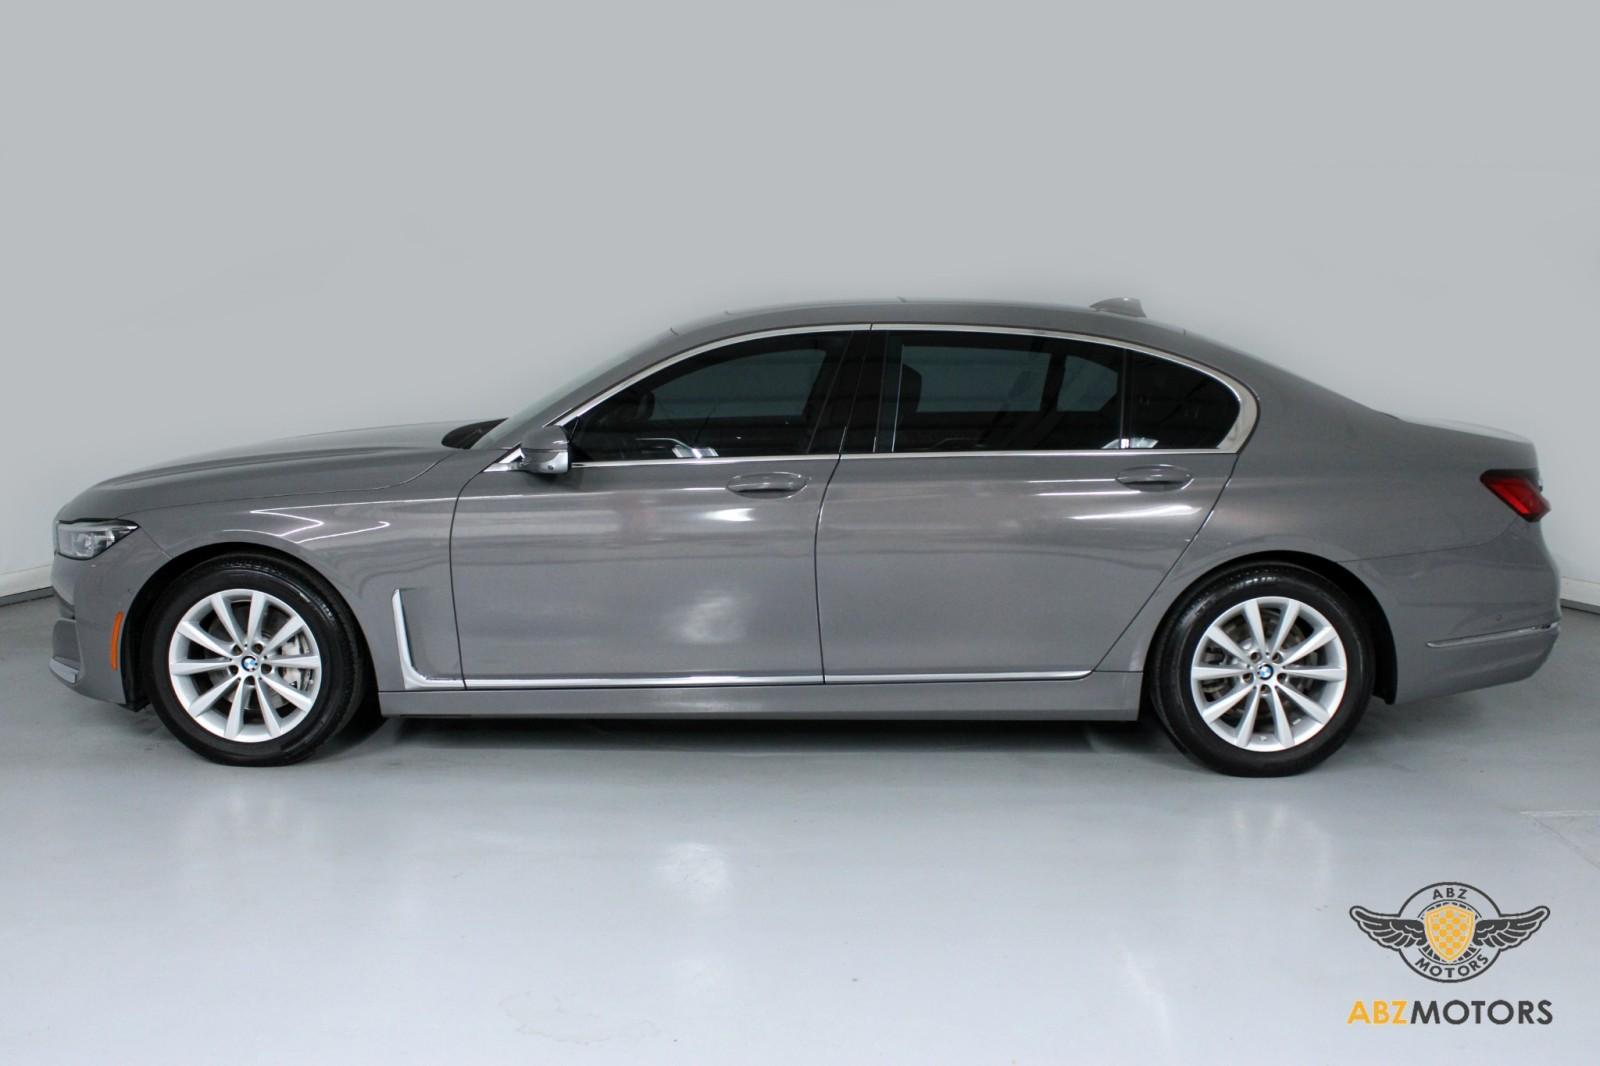 740i　Used　(Sold)　For　2021　BMW　Series　xDrive　#MCF01543　Sale　Autobyzack　Inc　Stock